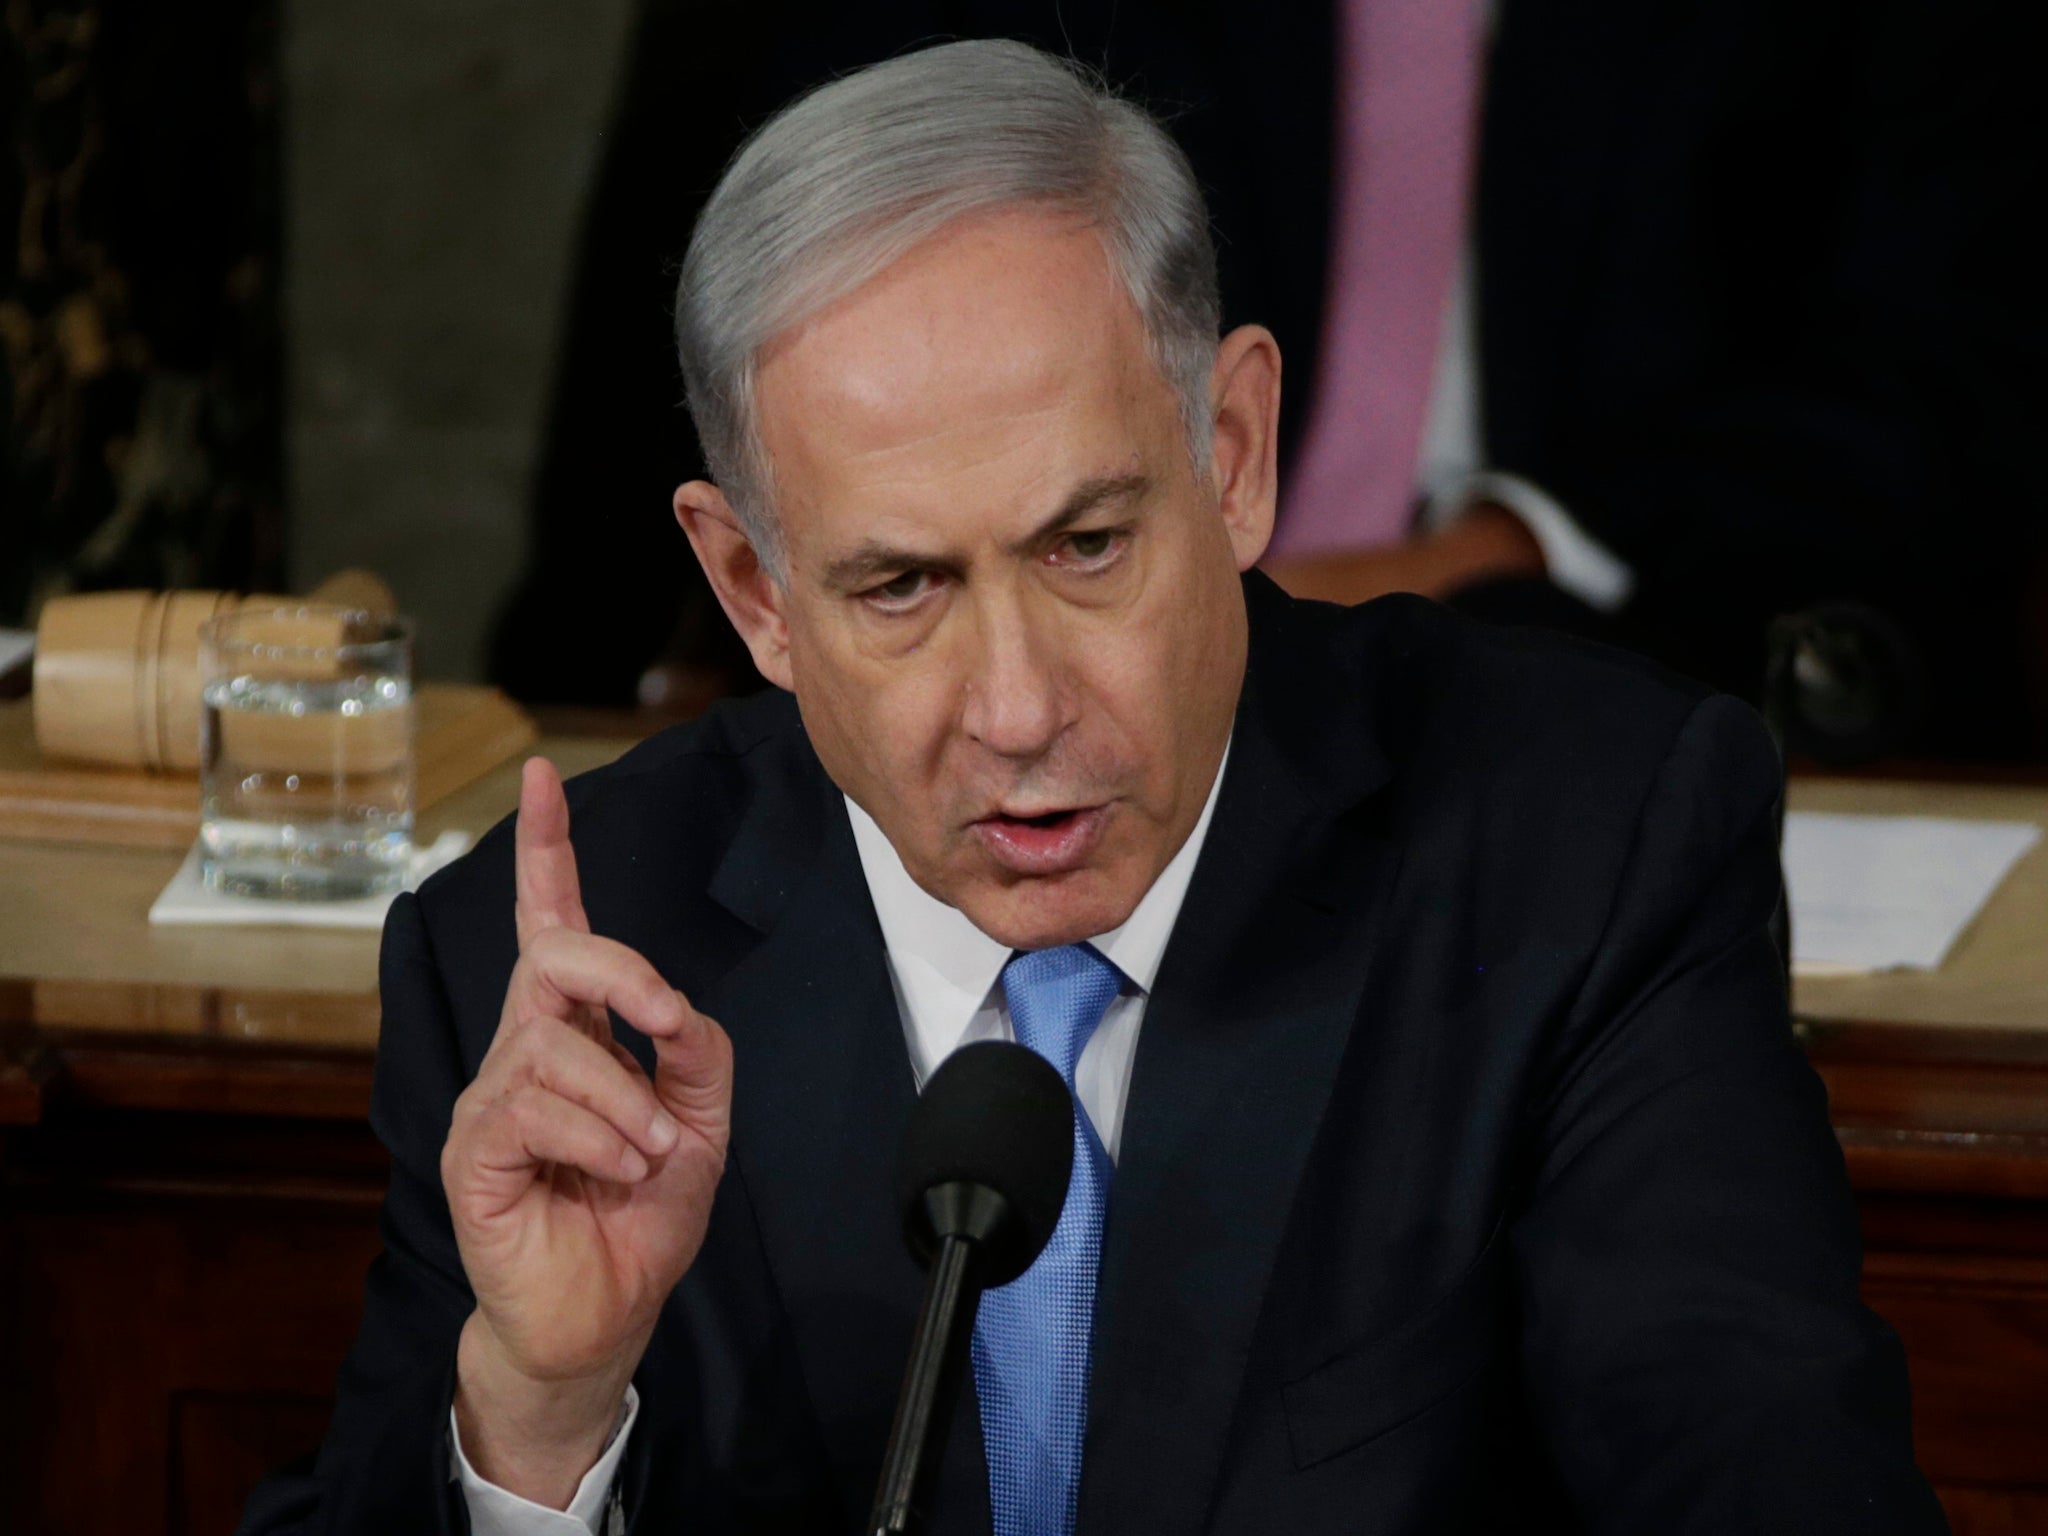 Benjamin Netanyahu spoke to a joint session of Congress